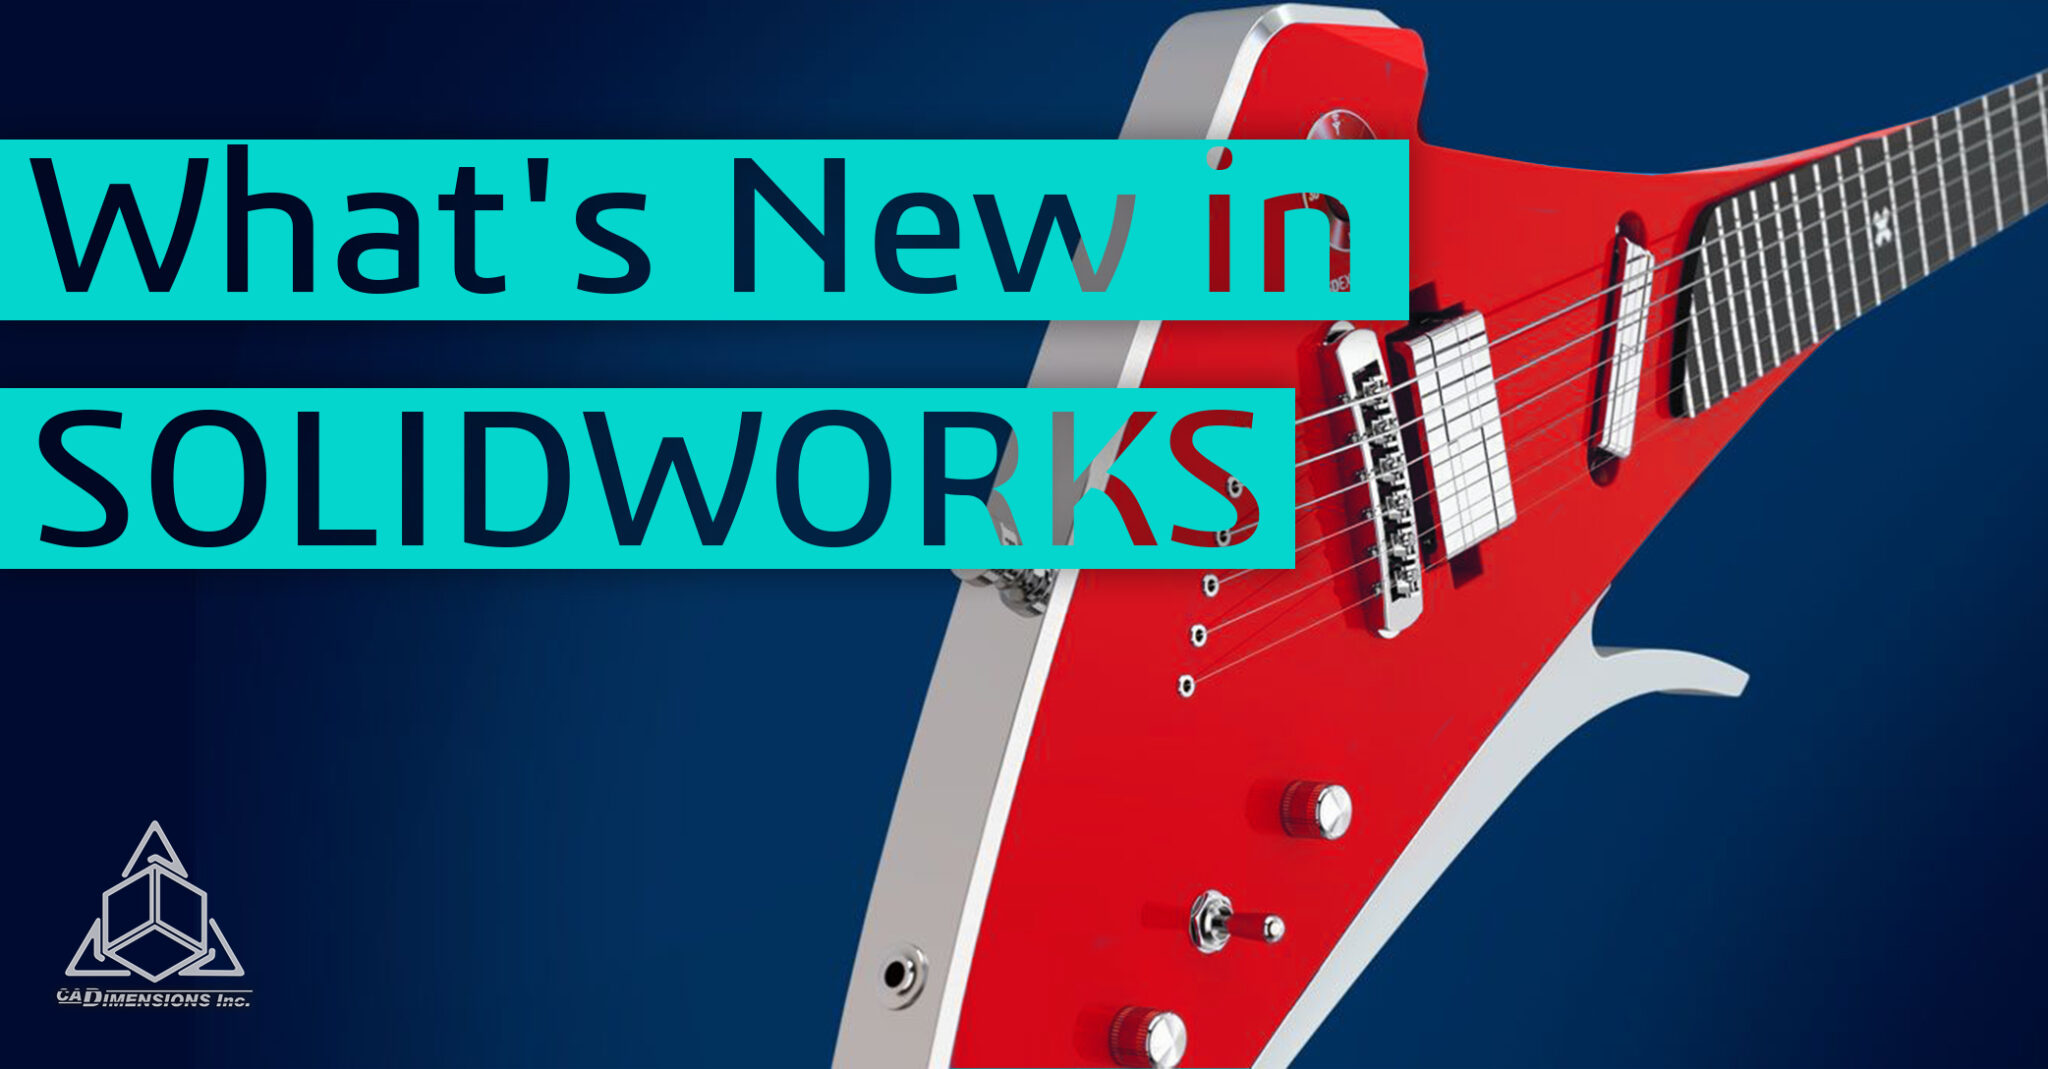 What’s New in the 2019-2020 SOLIDWORKS Education Edition?